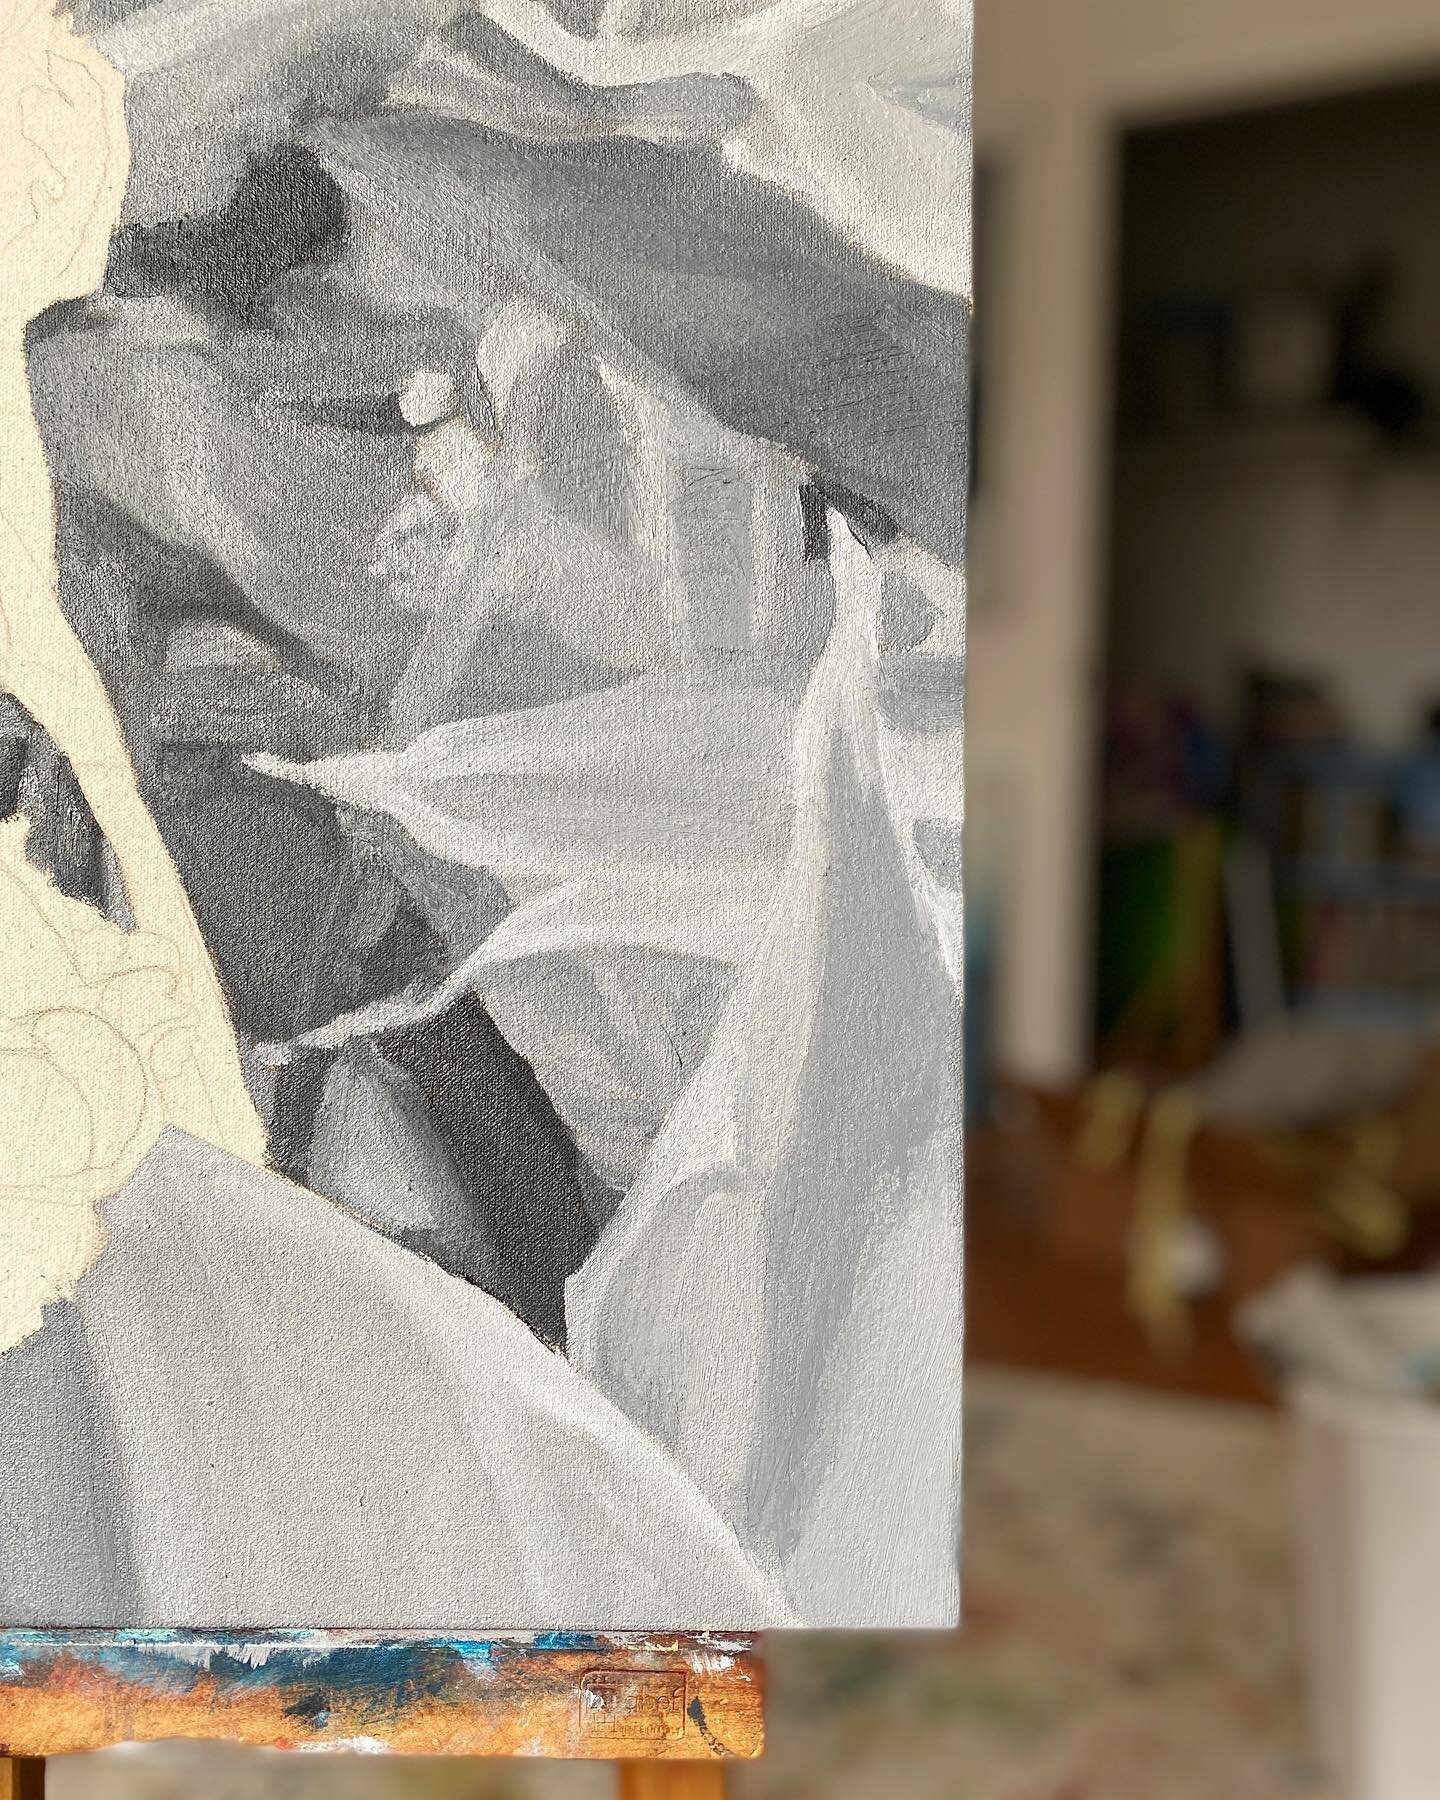 A little glimpse of today&rsquo;s WIP ⚫️⚪️

#oilpainting #portlandartist #botanicalart #blackandwhitepainting #wip